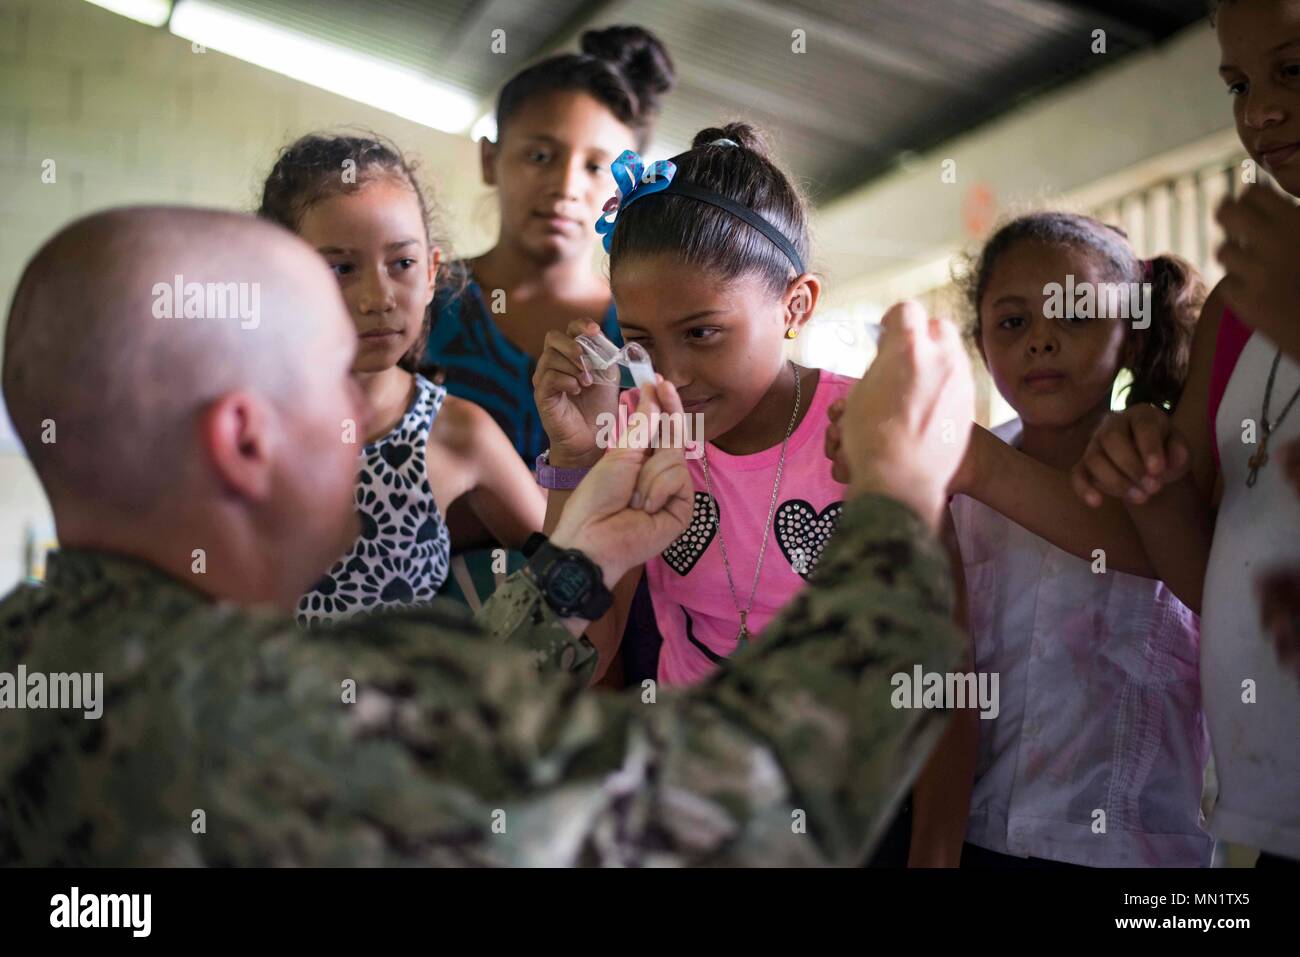 170810-N-KW679-0058 Tarros, Honduras (August 10, 2017) Lt. Cmdr. Ian Sutherland, technical director assigned to the Navy Entomology Center of Excellence, teaches students about entomology, during a Southern Partnership Station 17 community relations project (COMREL) at Escuela Rural Mixta Luz y Esperanza, a local elementary school. SPS 17 is a U.S. Navy deployment, executed by U.S. Naval Forces Southern Command/U.S. 4th Fleet, focused on subject matter expert exchanges with partner nation militaries and security forces in Central and South America. (U.S. Navy photo by Mass Communication Specia Stock Photo